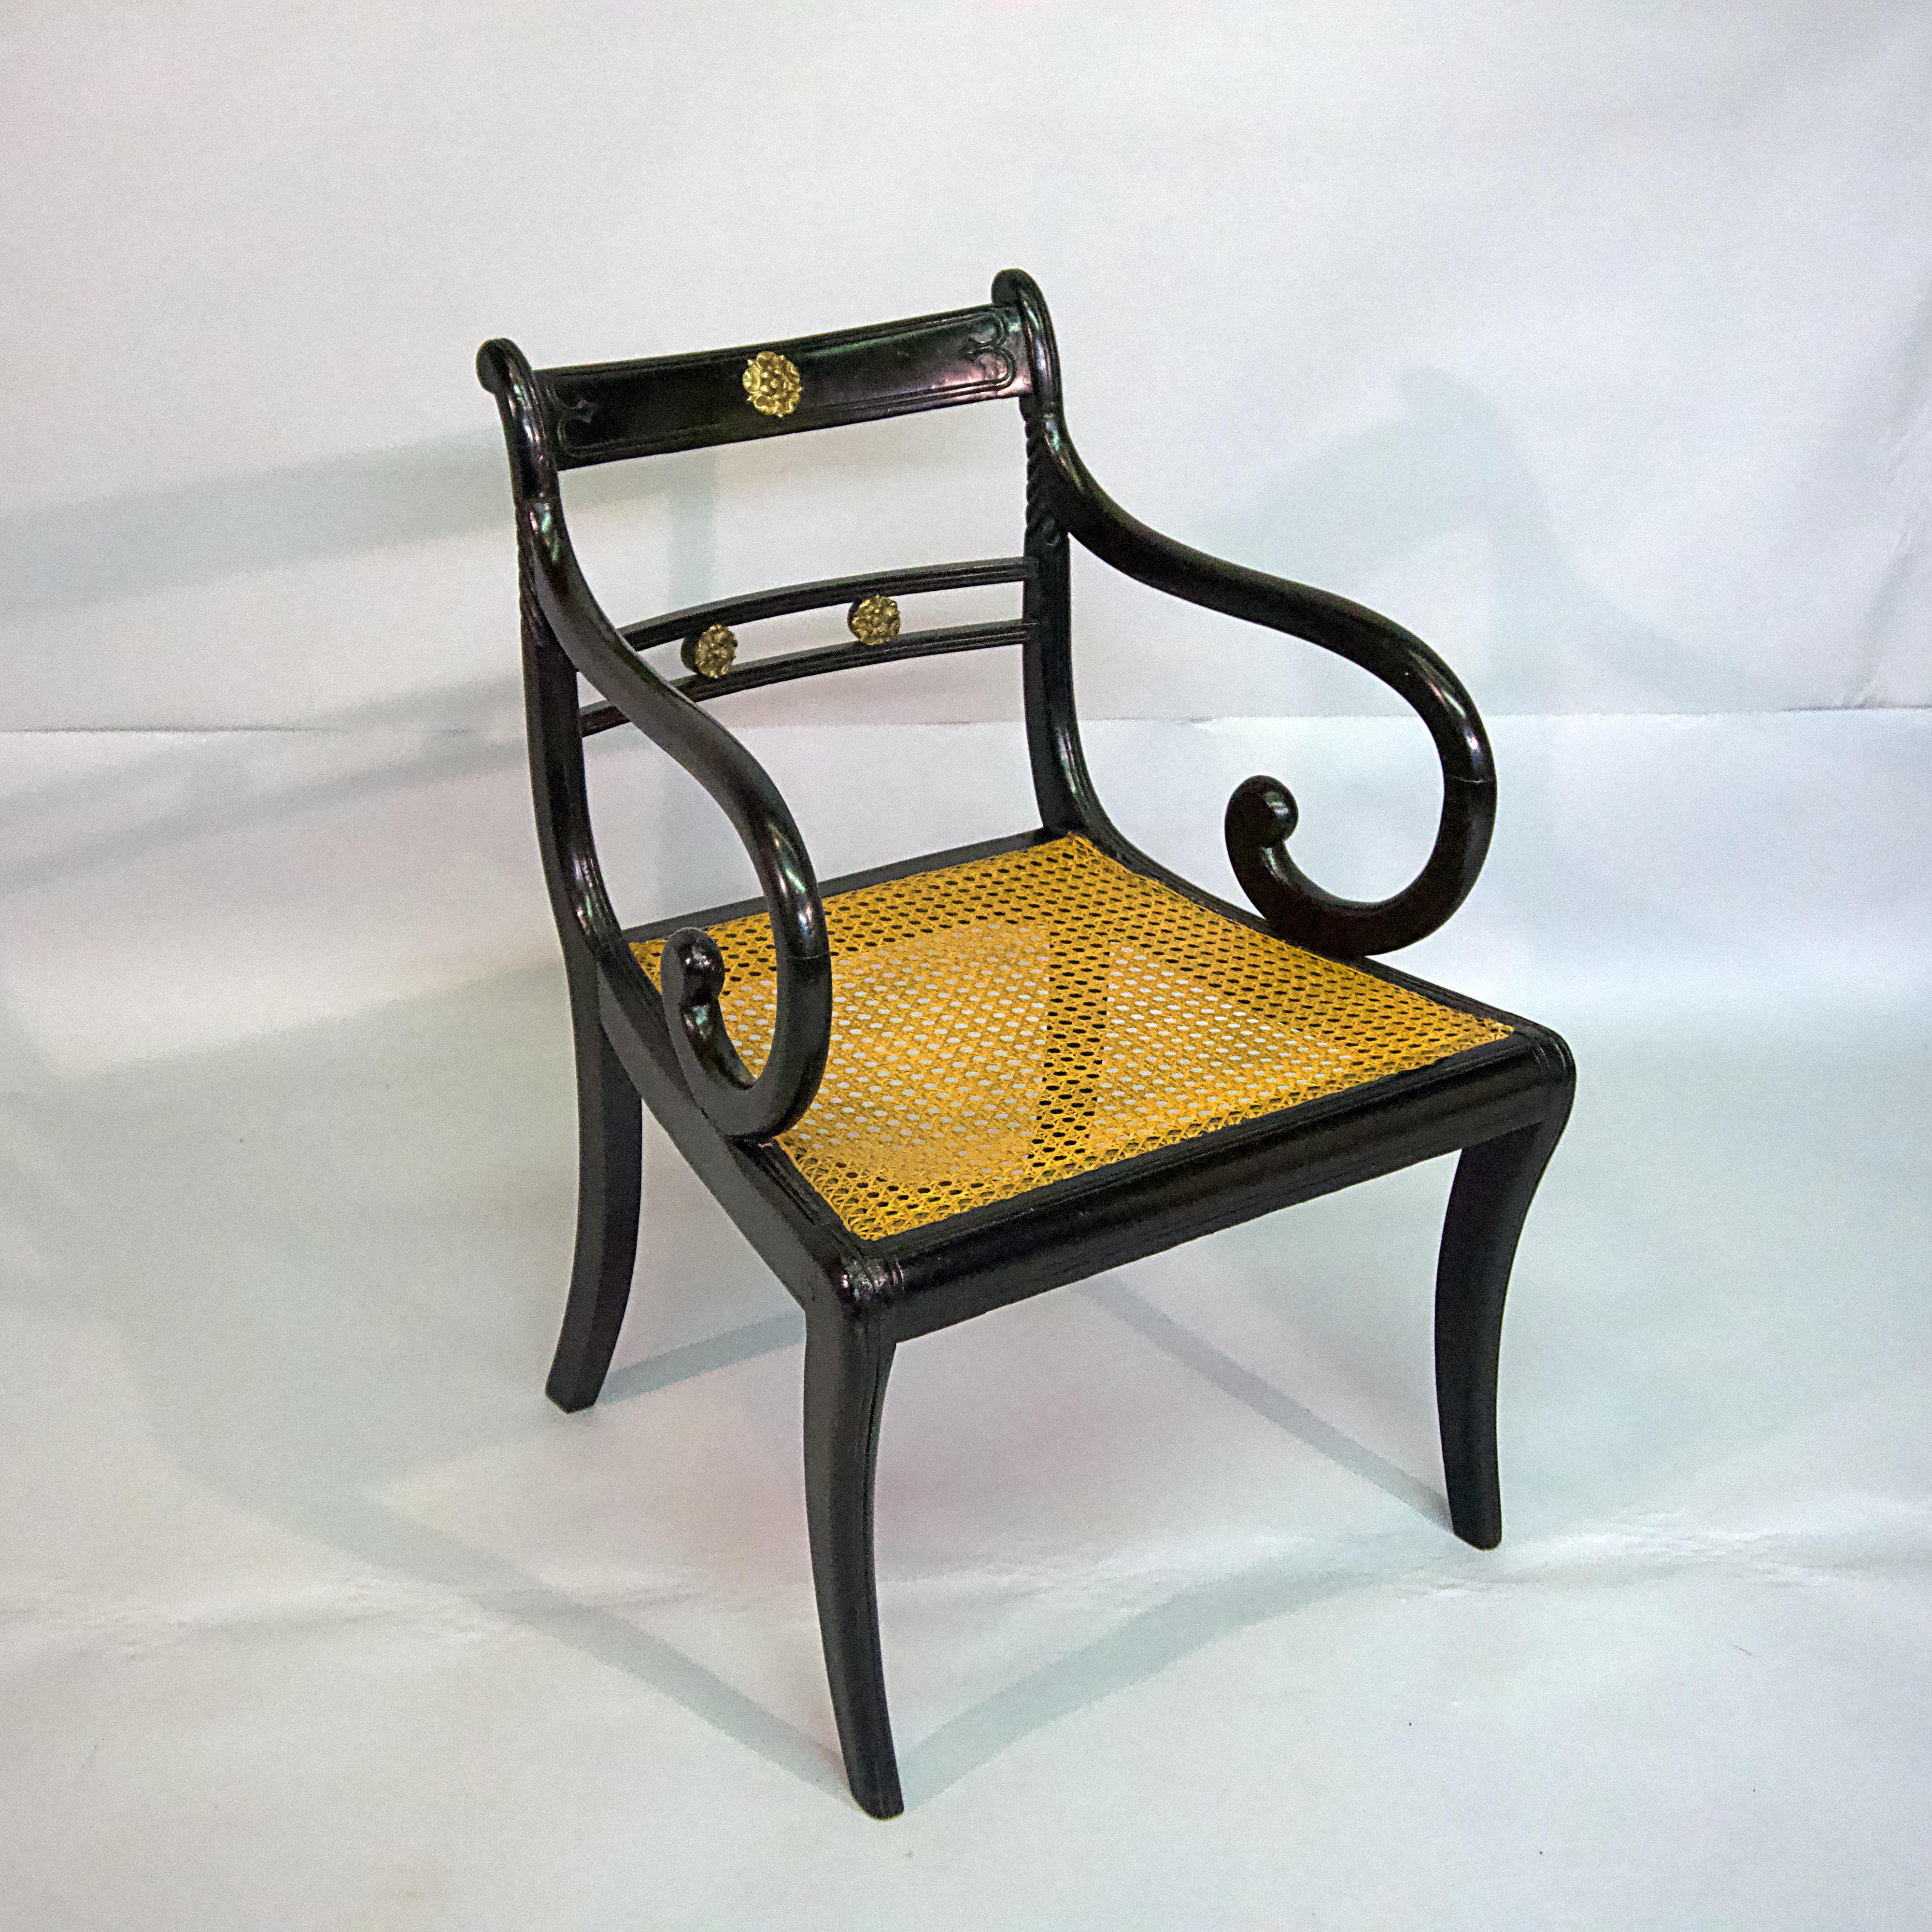 Regency ebonized caned armchair with brass accents.